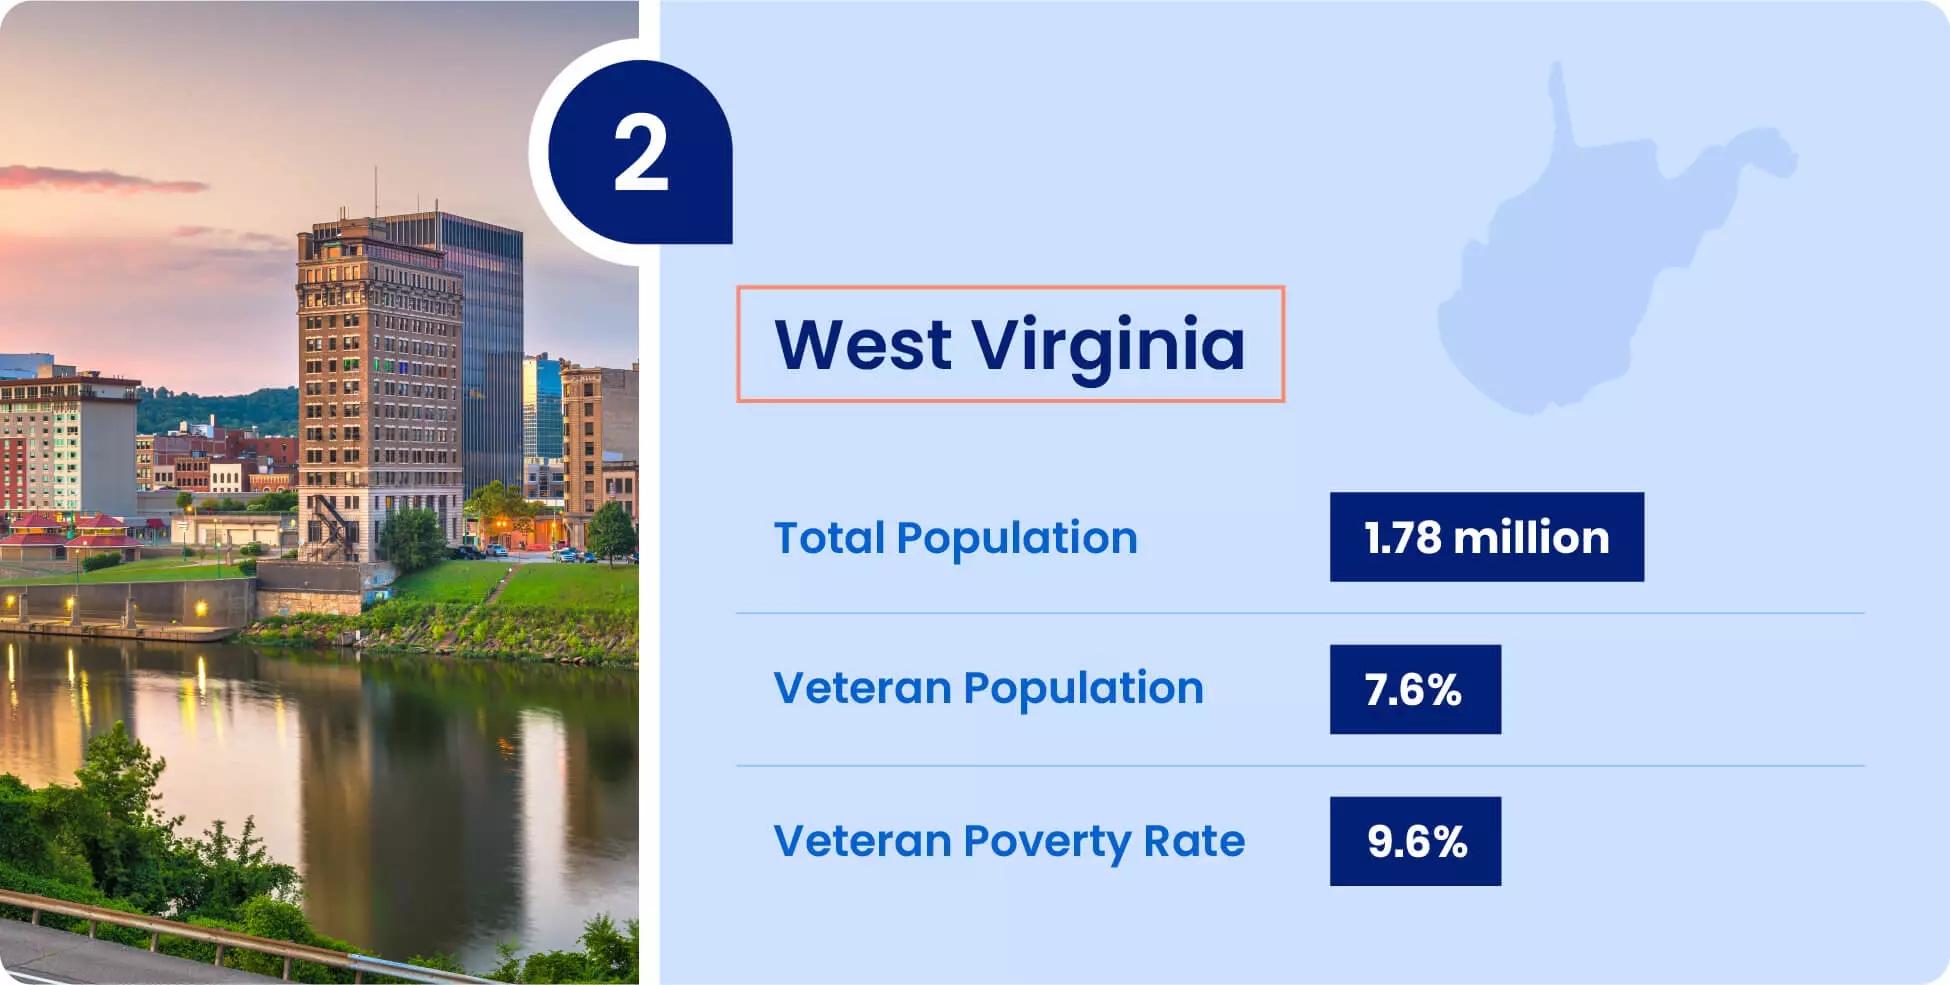 Image shows key information for military retirees thinking of moving to West Virginia.